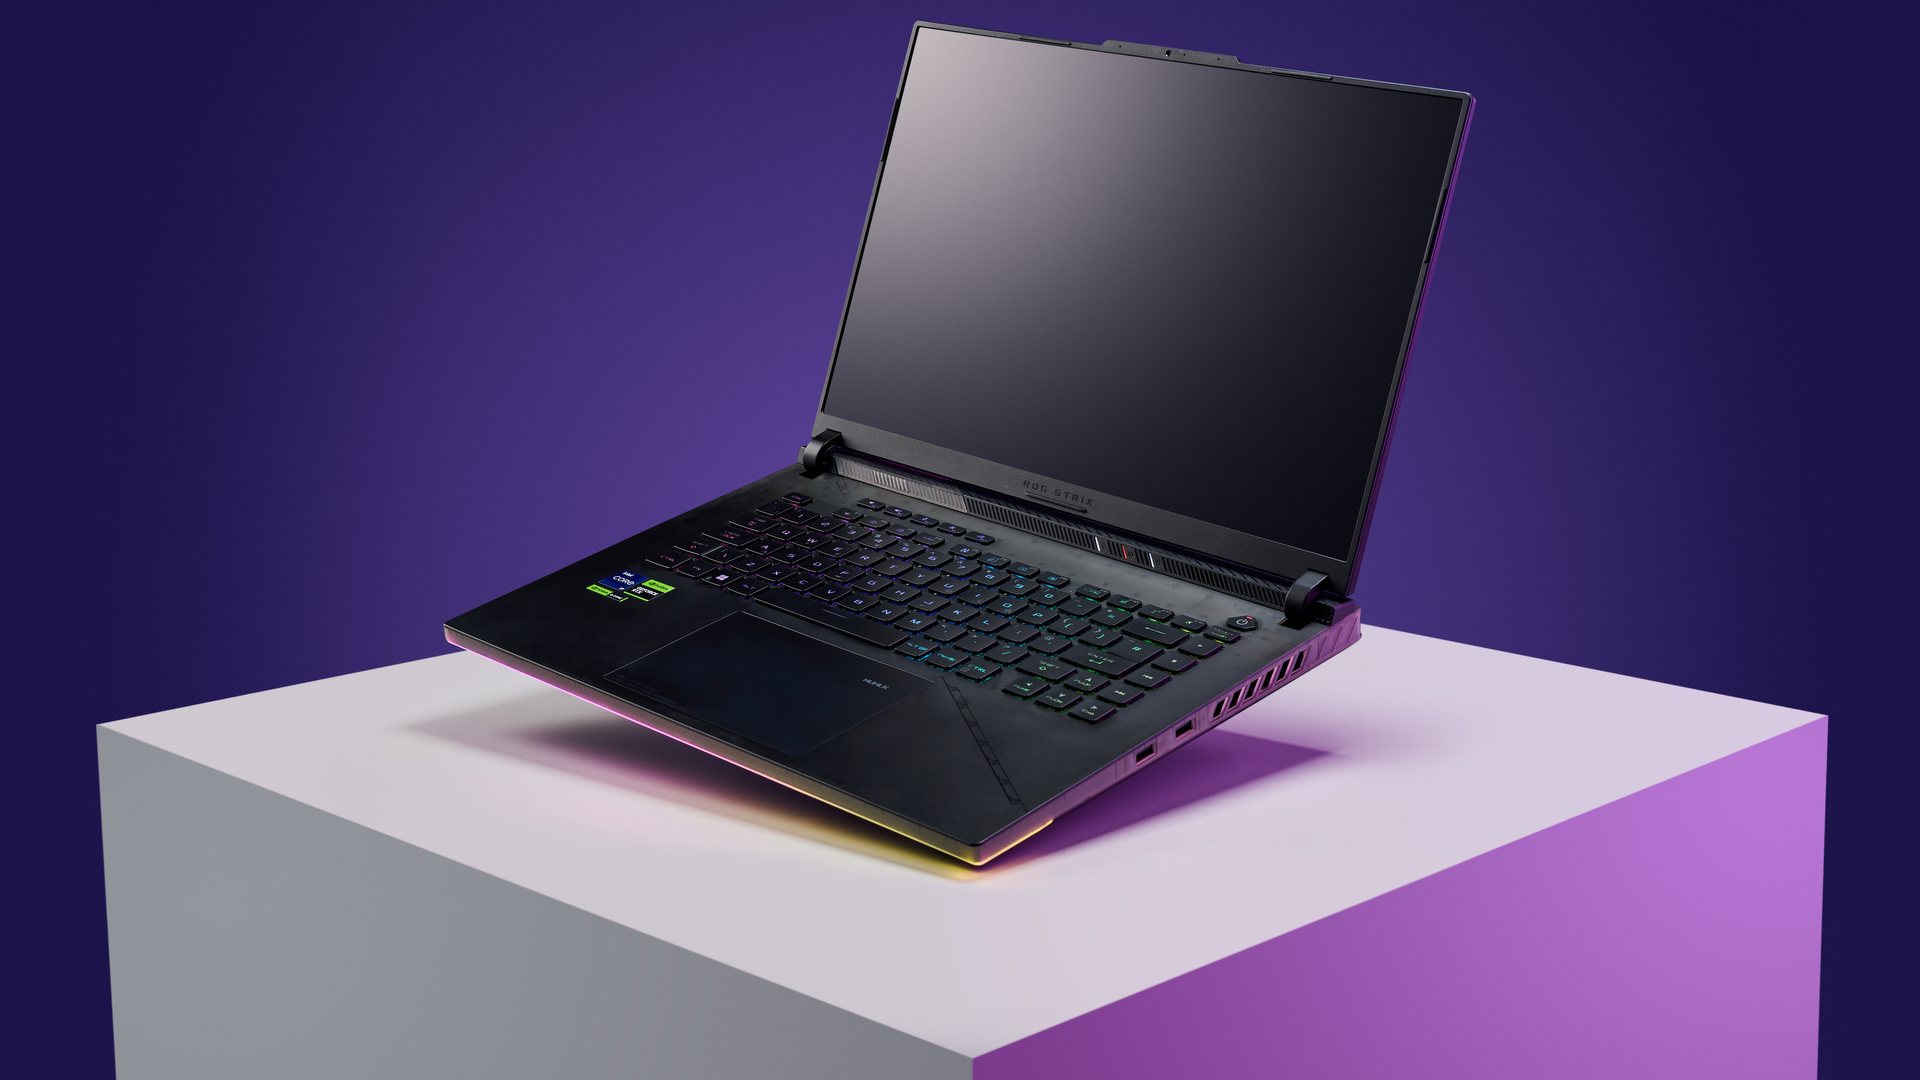 Asus ROG Strix G16 review: A powerful laptop with cyberpunk